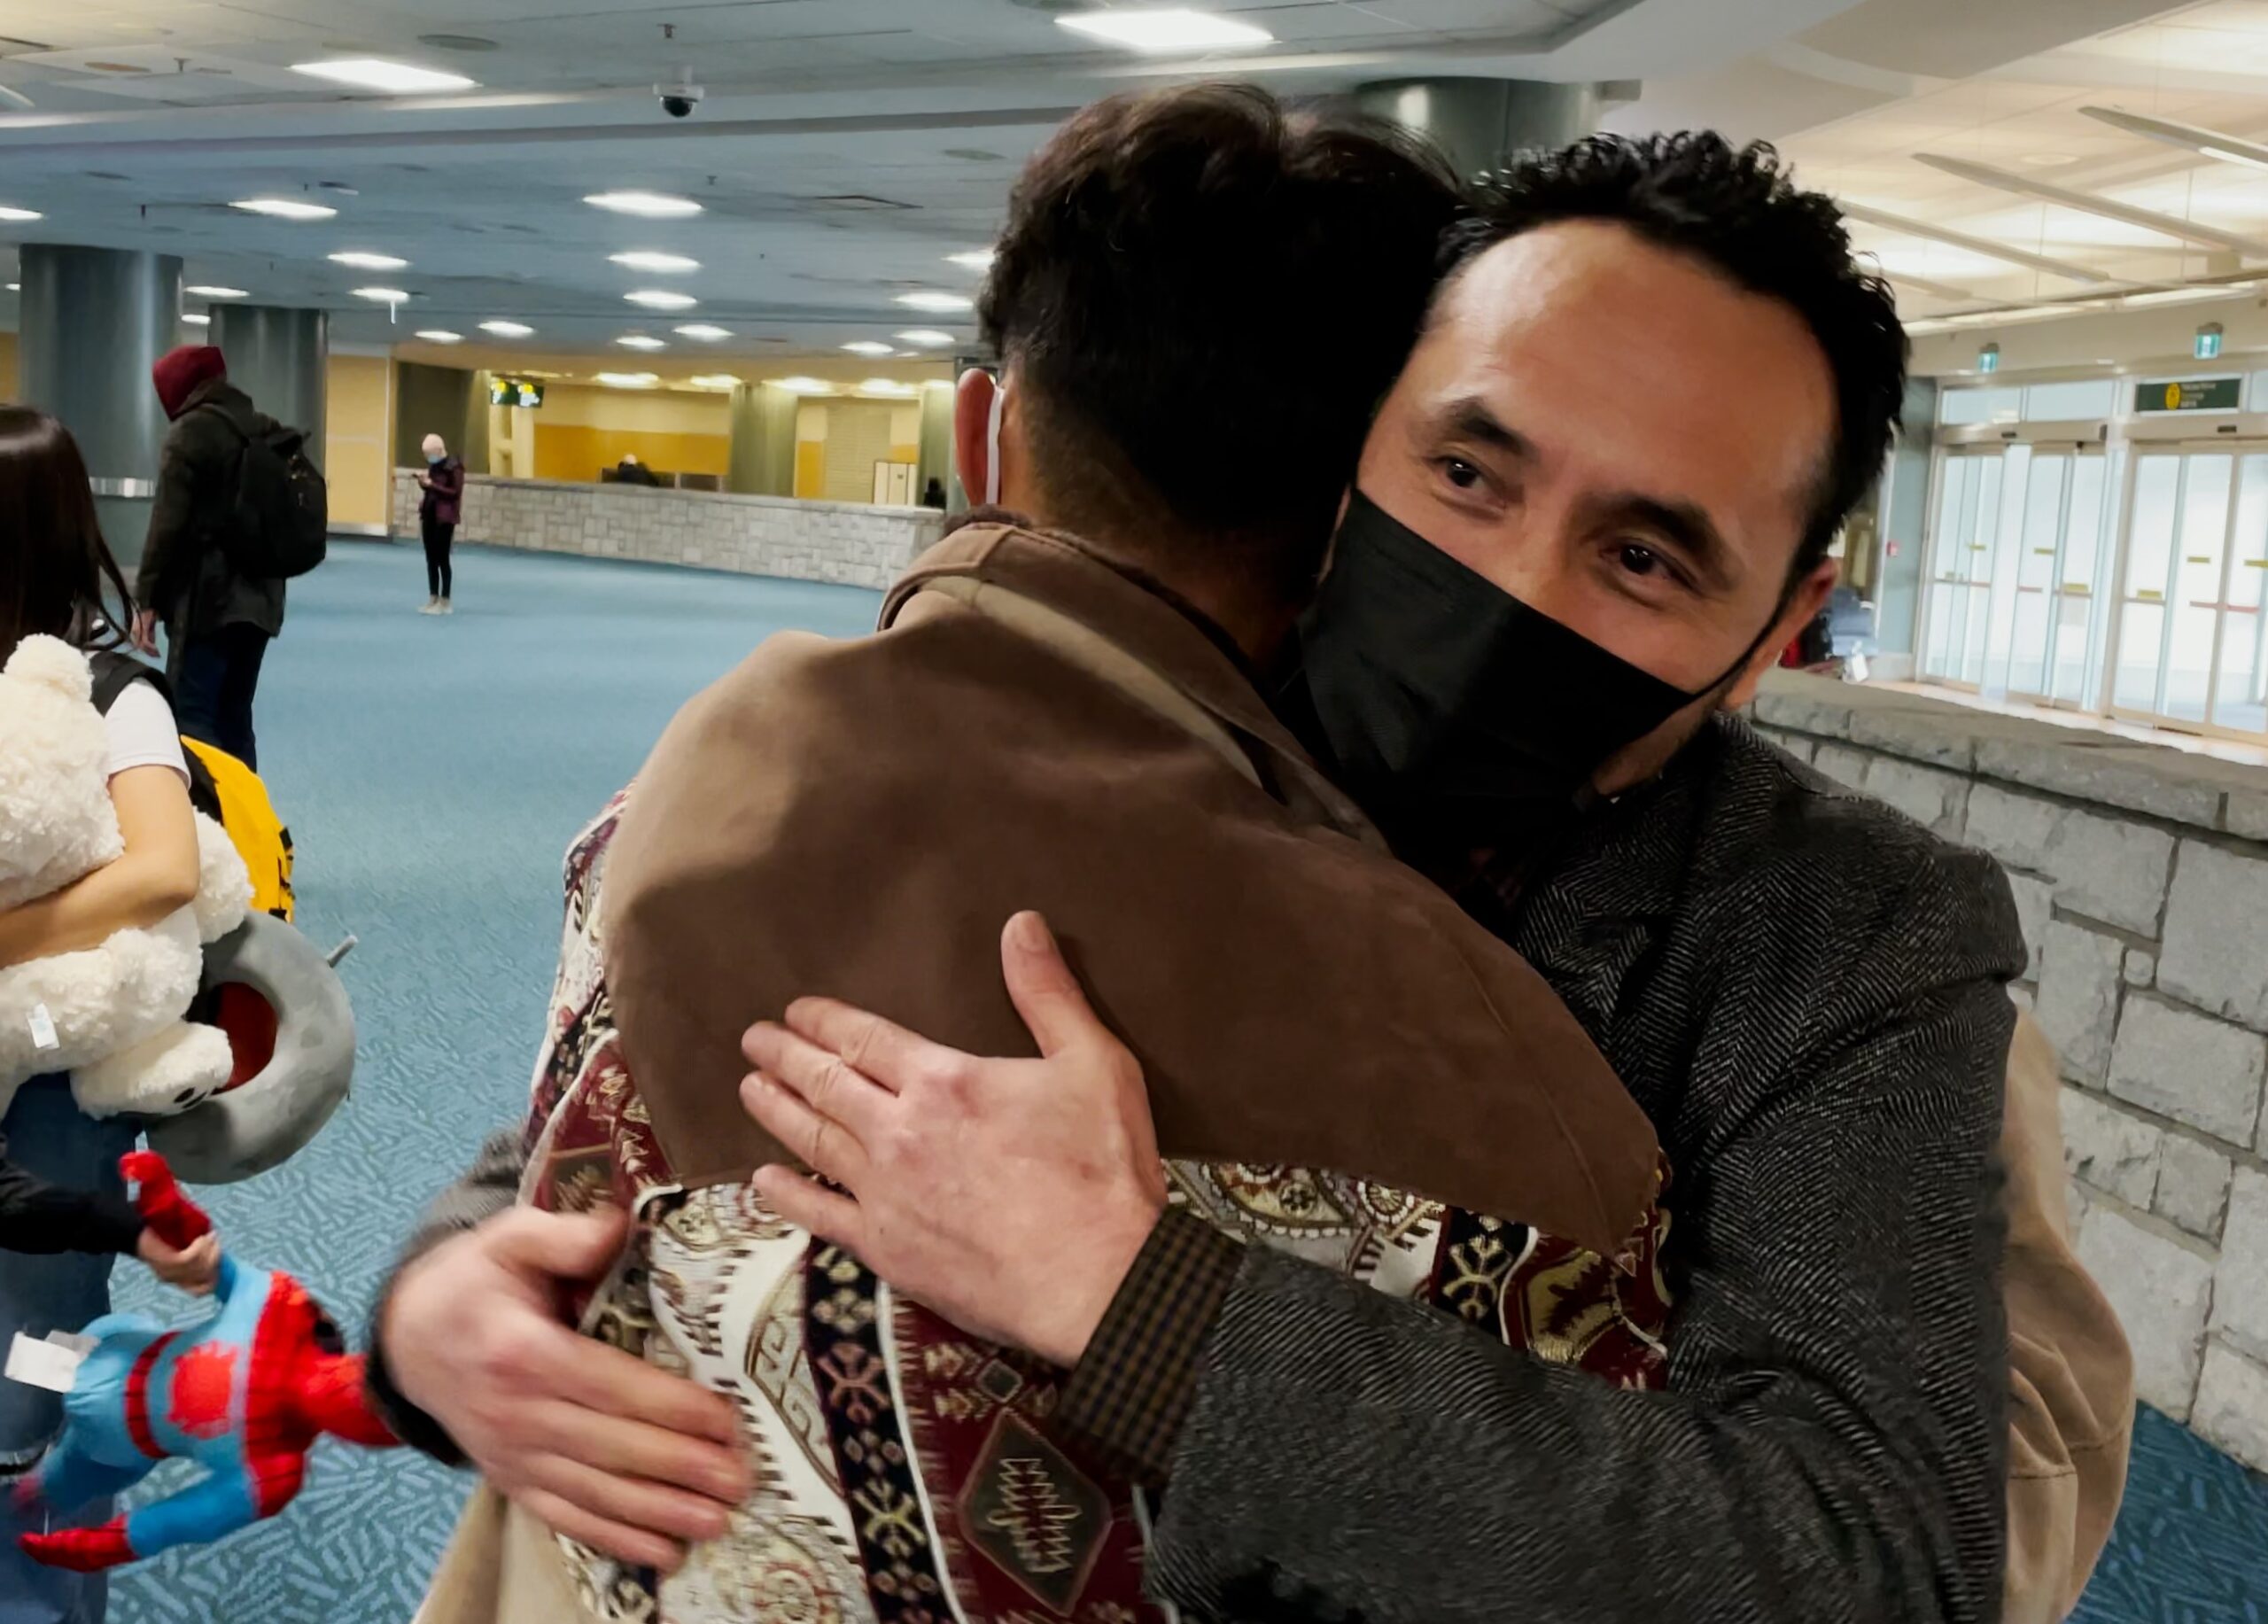 Advocates say if the Afghan community itself is involved in resettling Afghan refugees it will help foster trust and relationships, which is crucial to helping refugees navigate a new system.